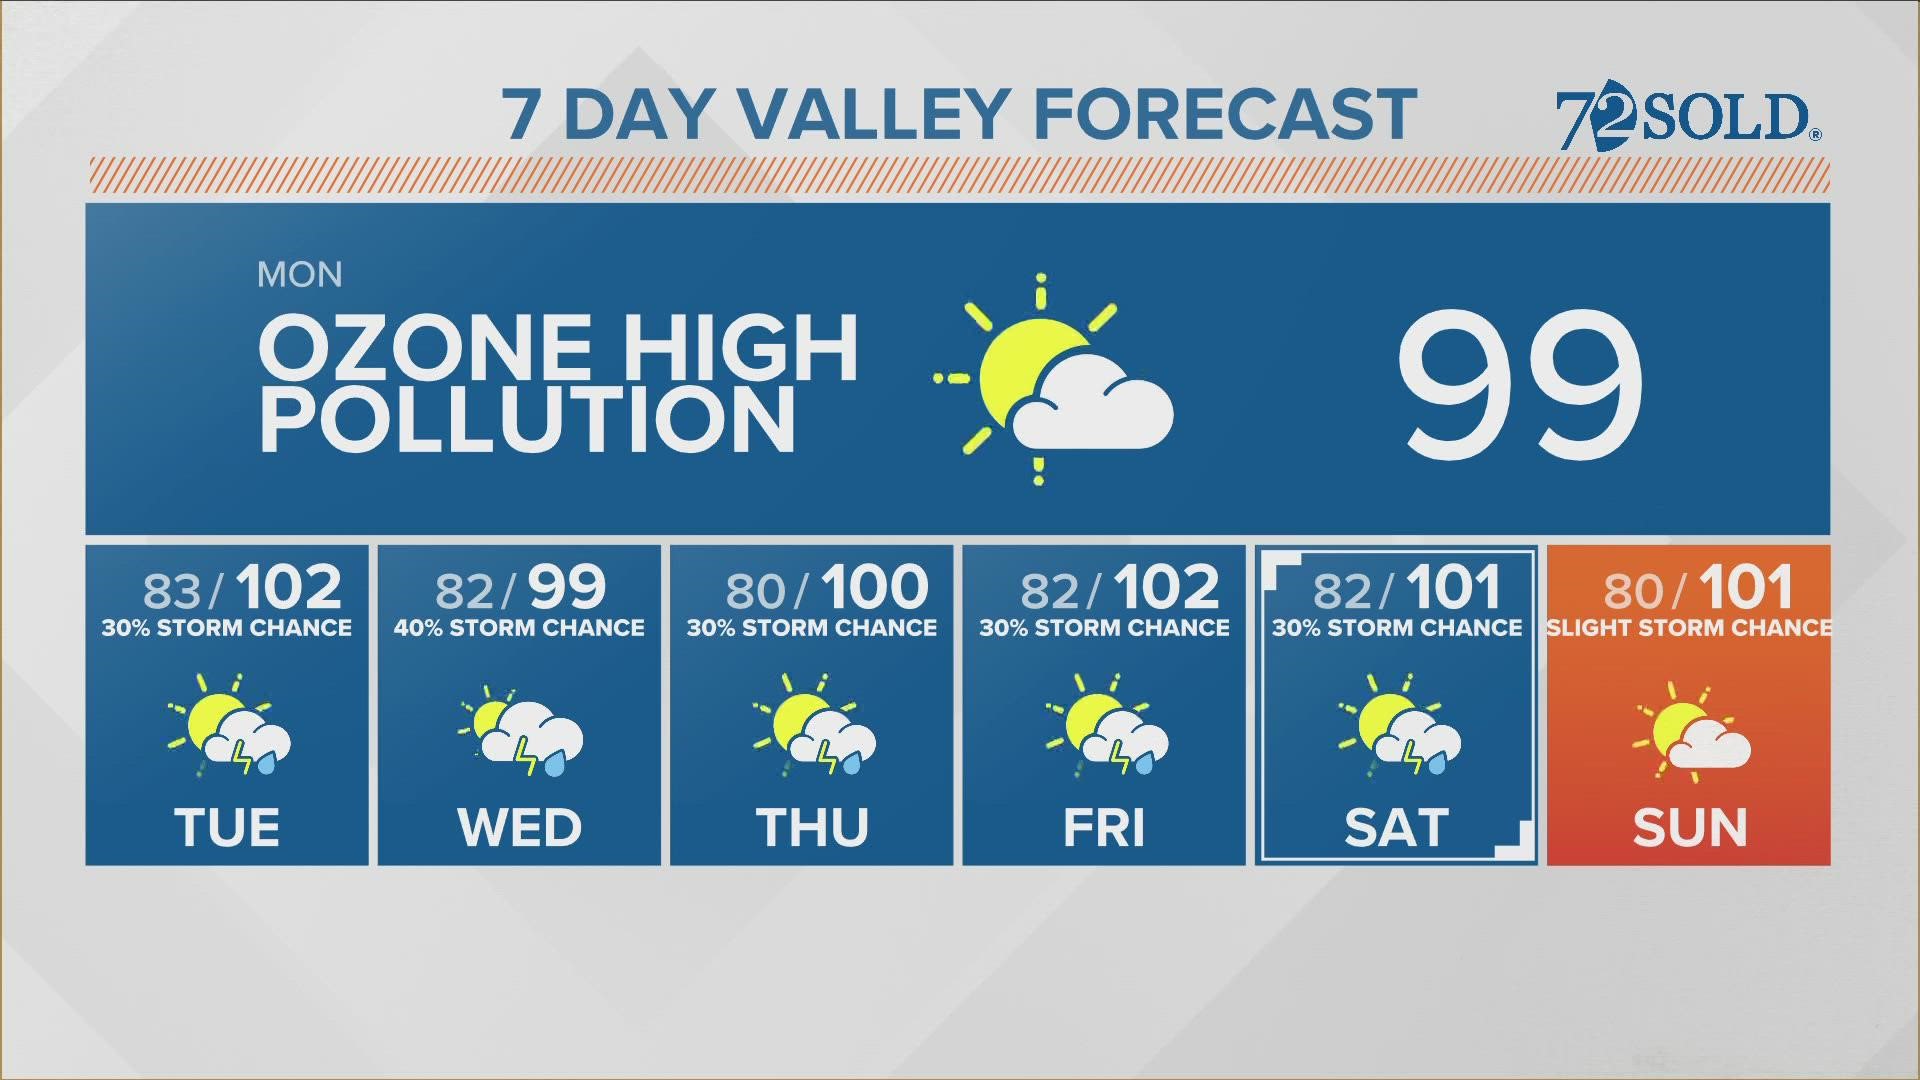 Monsoon storms will slow down for the early workweek with more rain on the way for the High Country.